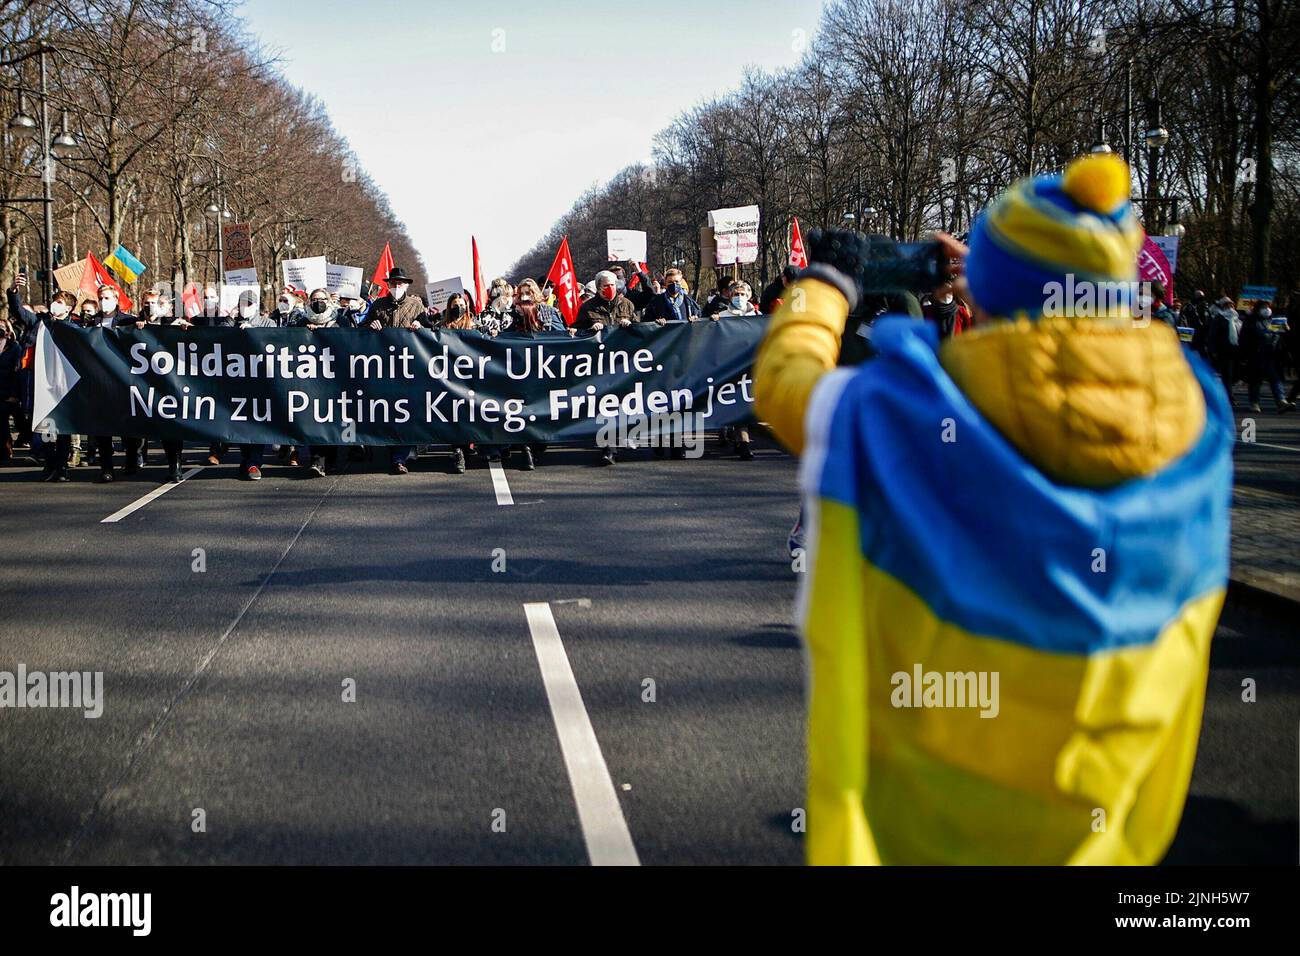 Berlin, Deutschland. 27th Feb, 2022. The SPD is calling for a demonstration in Berlin against Russia's invasion of Ukraine under the motto - setting a sign together for peace. Solidarity with Ukraine. No to Putin's war. peace now. Berlin, February 27, 2022. Credit: dpa/Alamy Live News Stock Photo